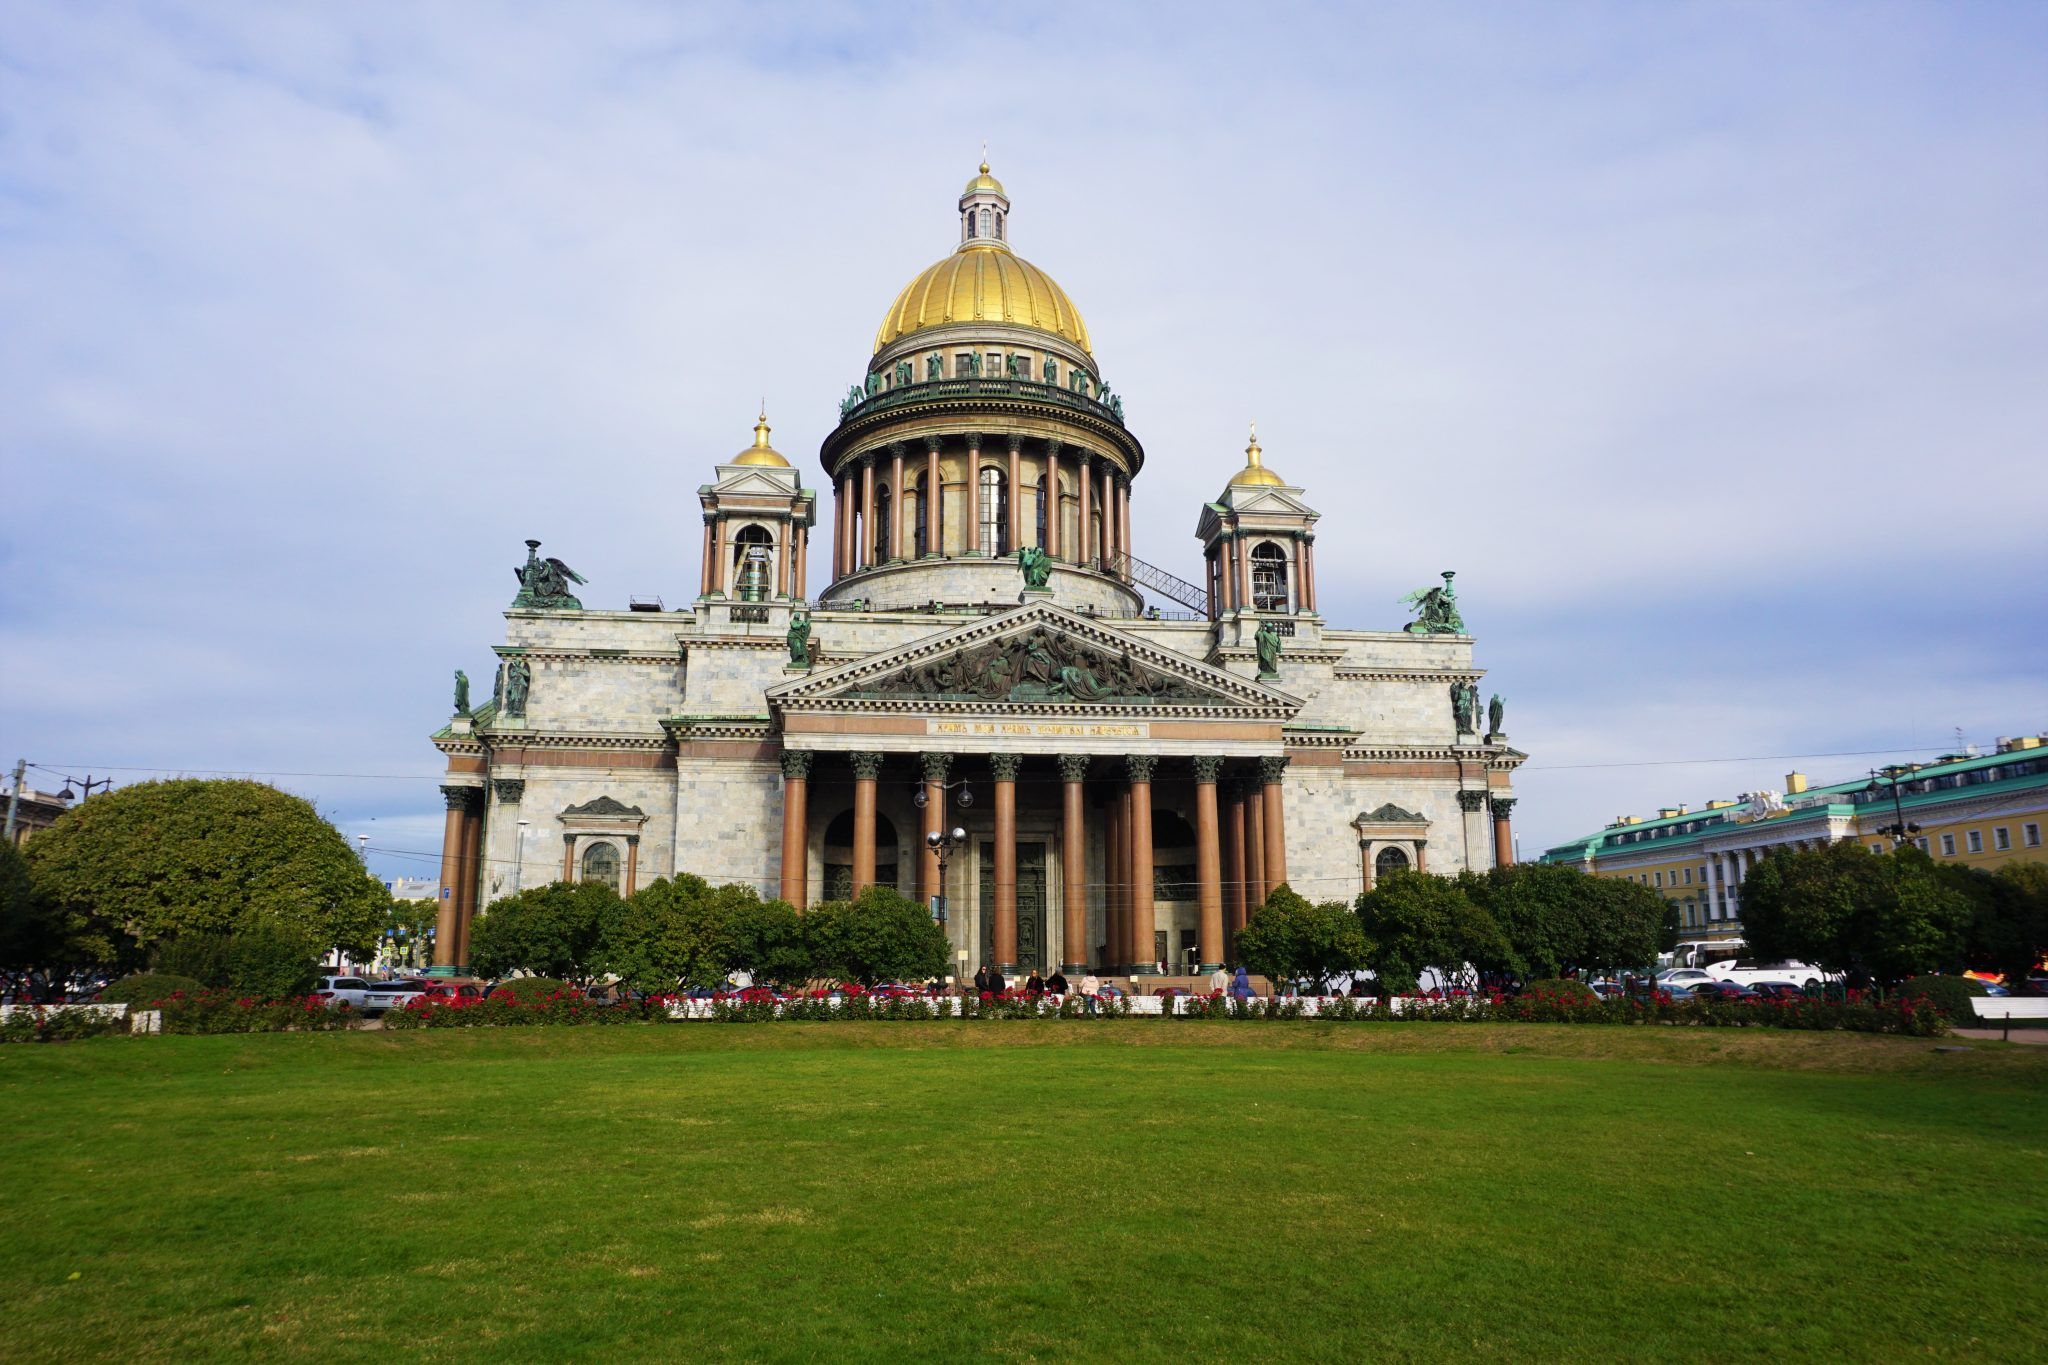 Top Things to Do in St. Petersburg, Russia